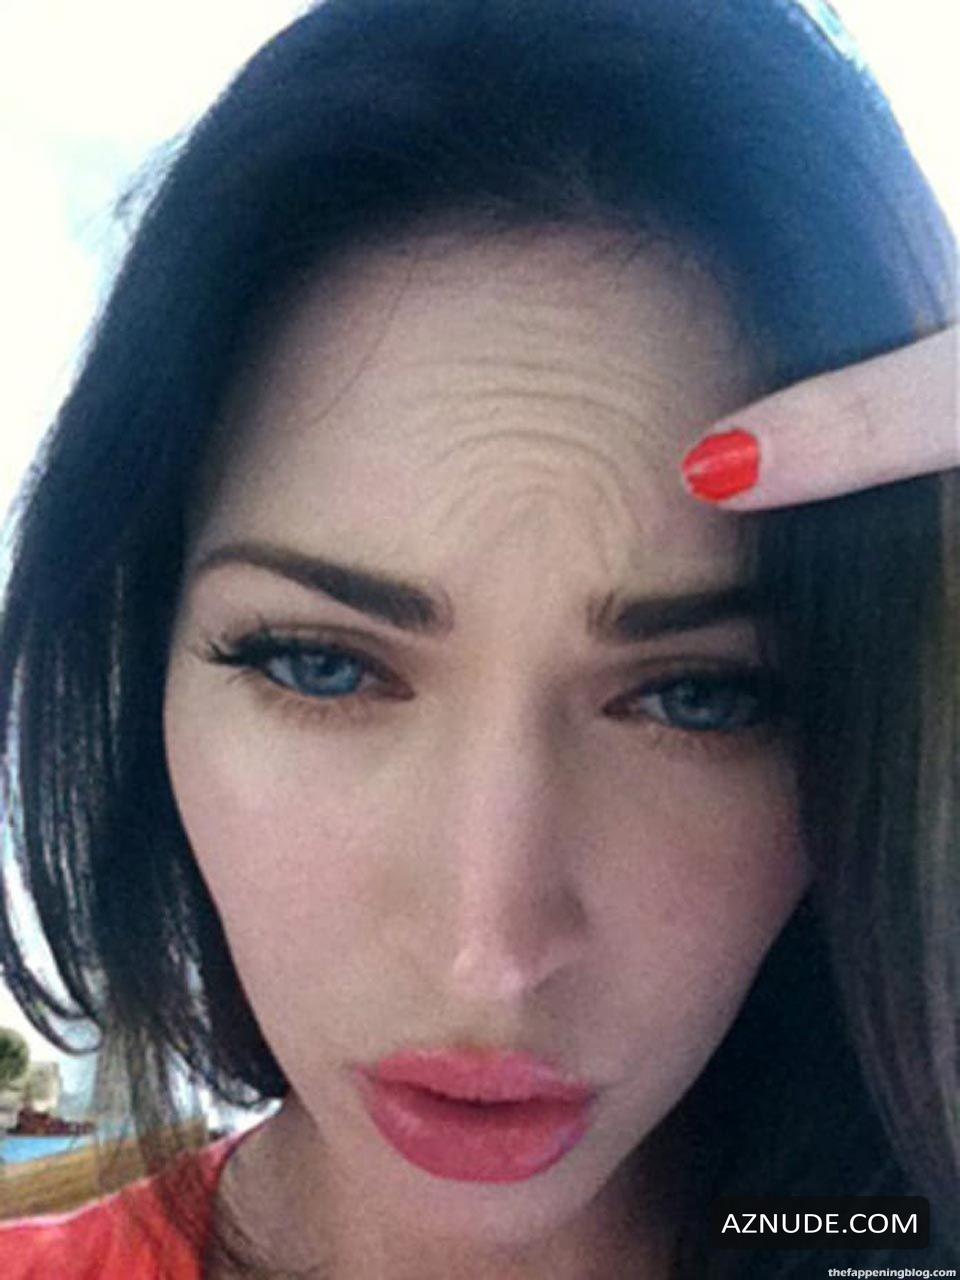 Megan Fox Nude And Sexual Photo Collection Aznude